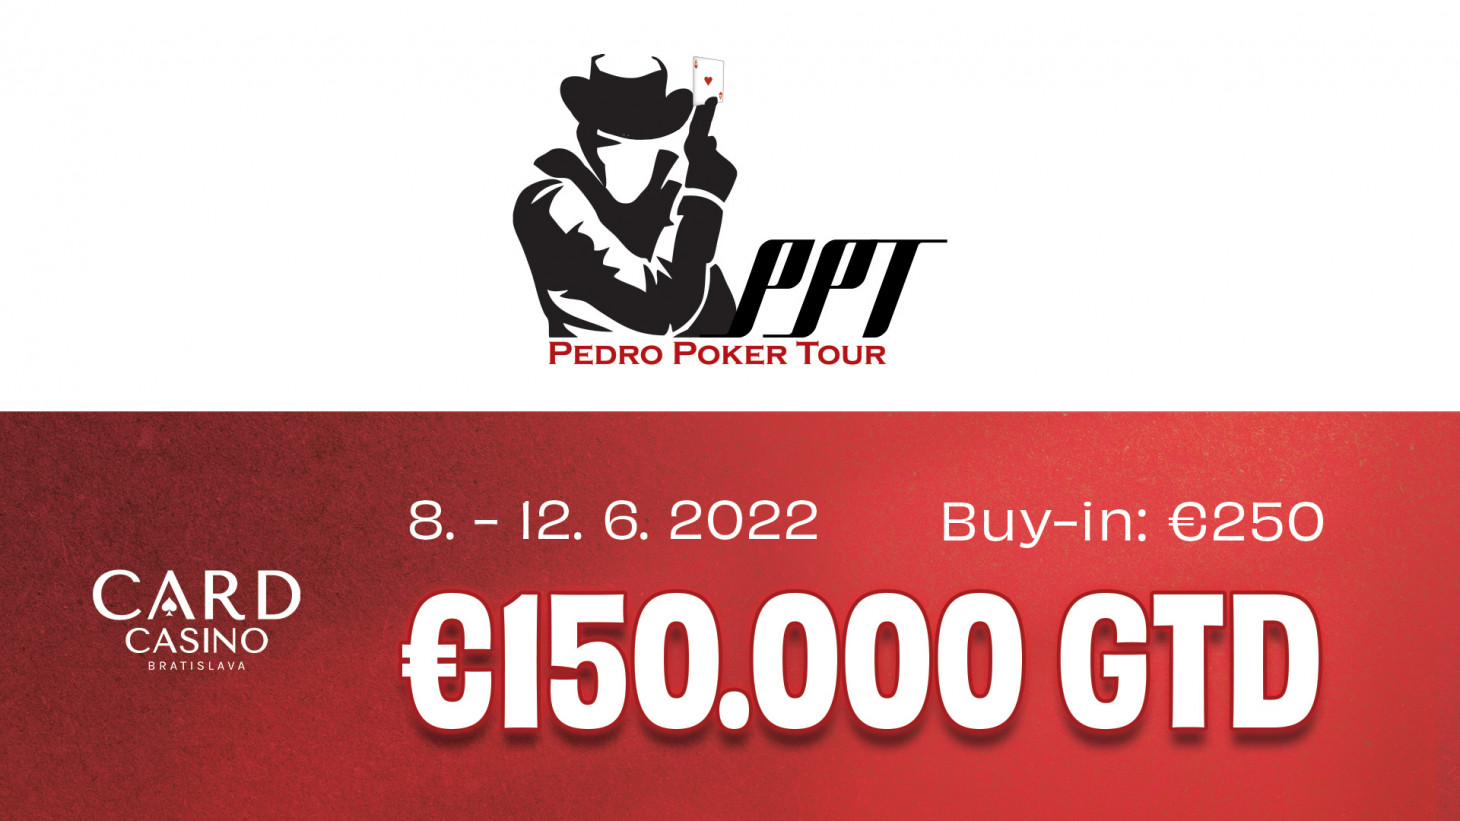 The Pedro Poker Tour returns to the scene. Card Casino brings its Main Event with €150,000 GTD!